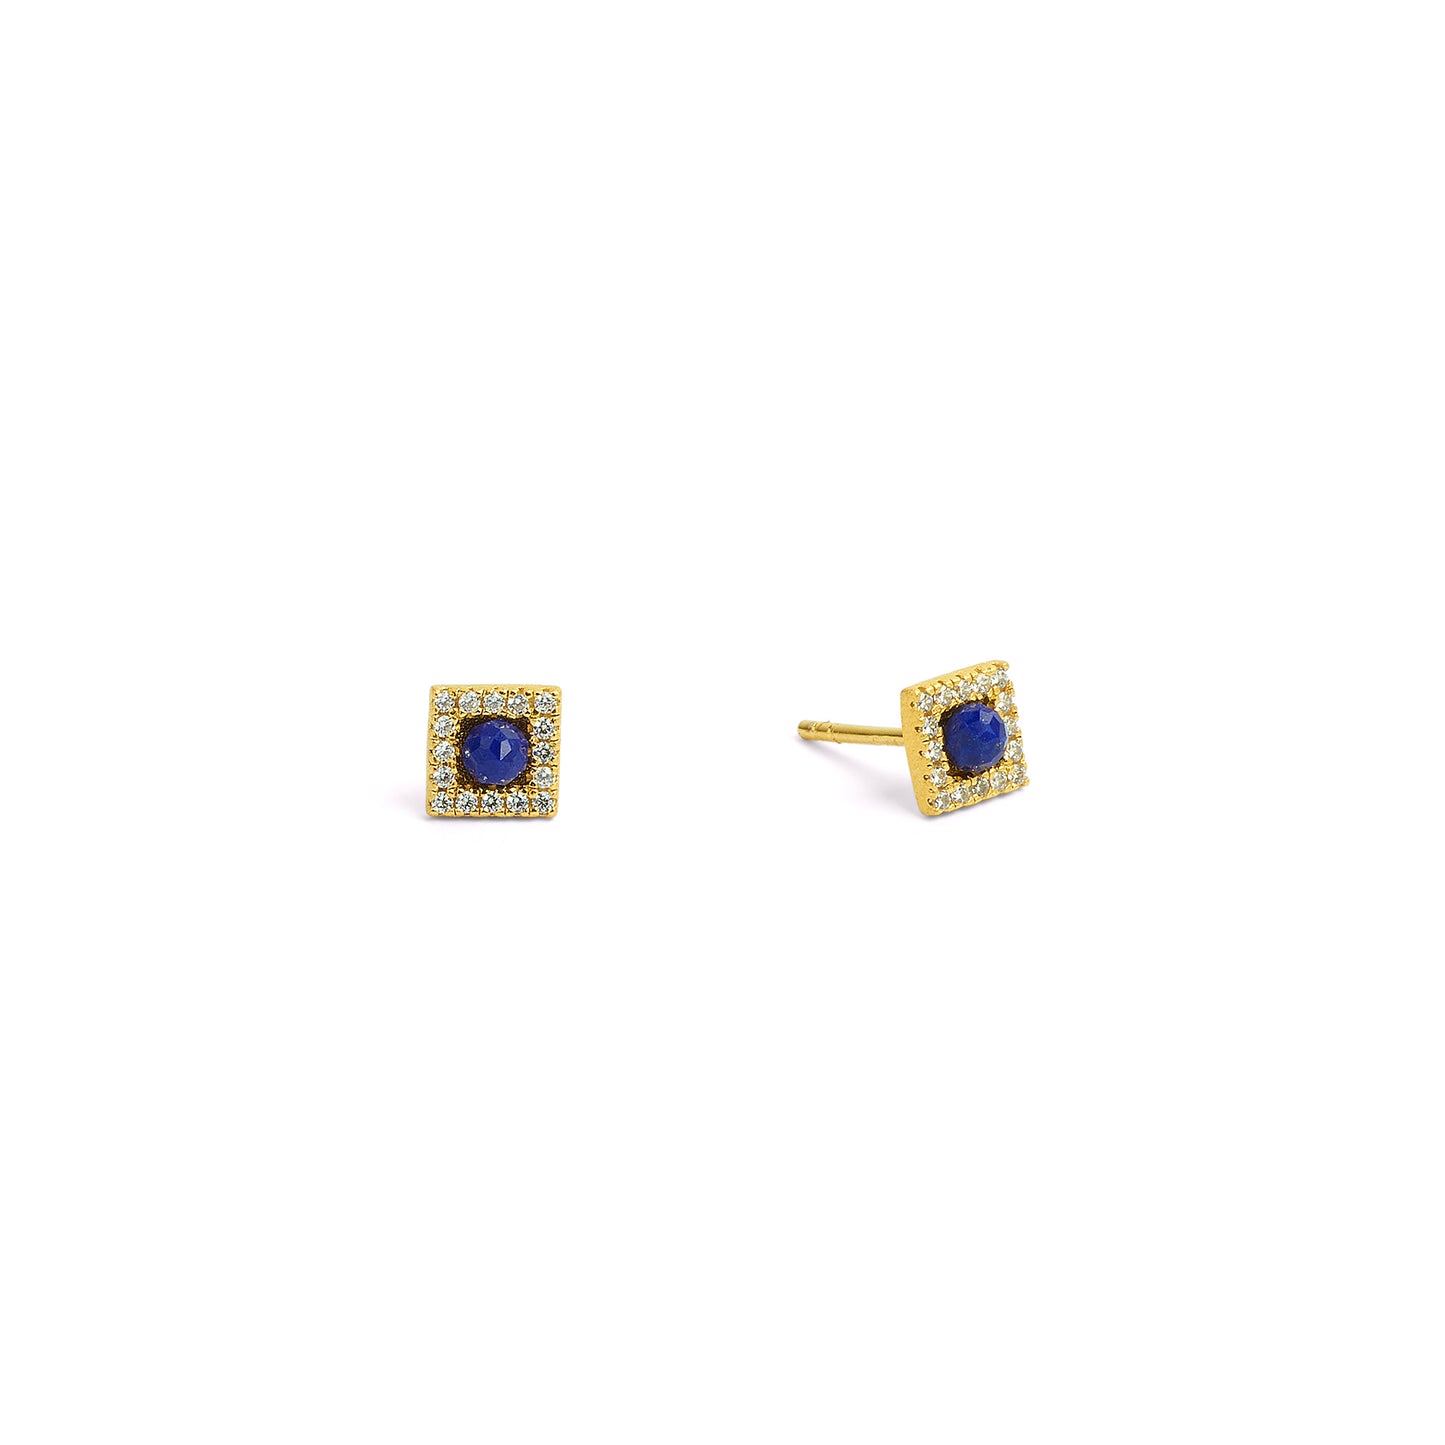 Bernd Wolf Collection "Abinia" Lapis Earrings